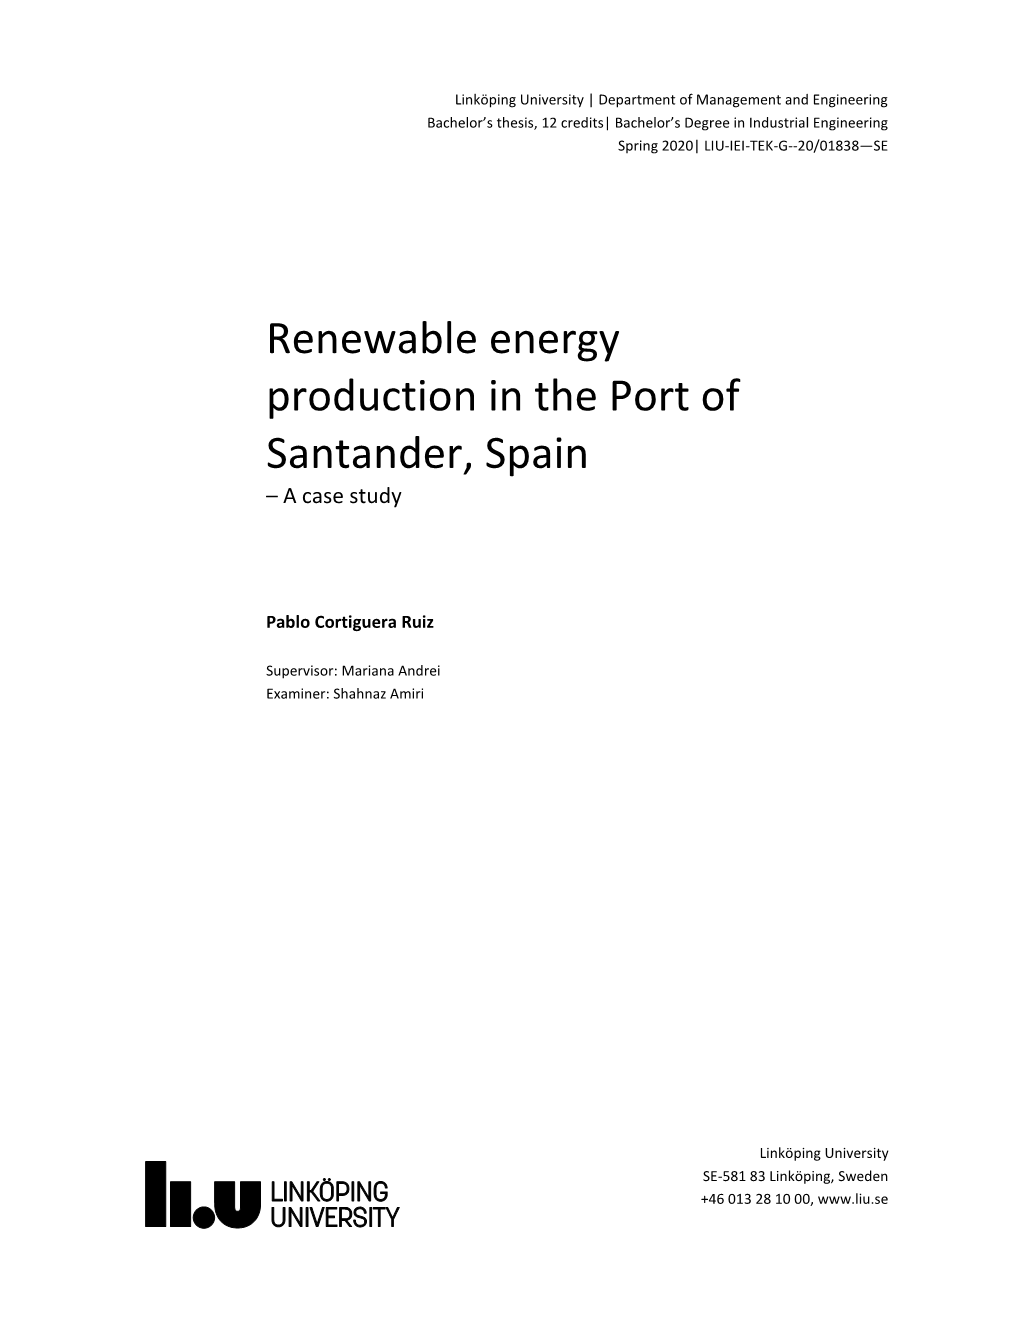 Renewable Energy Production in the Port of Santander, Spain – a Case Study